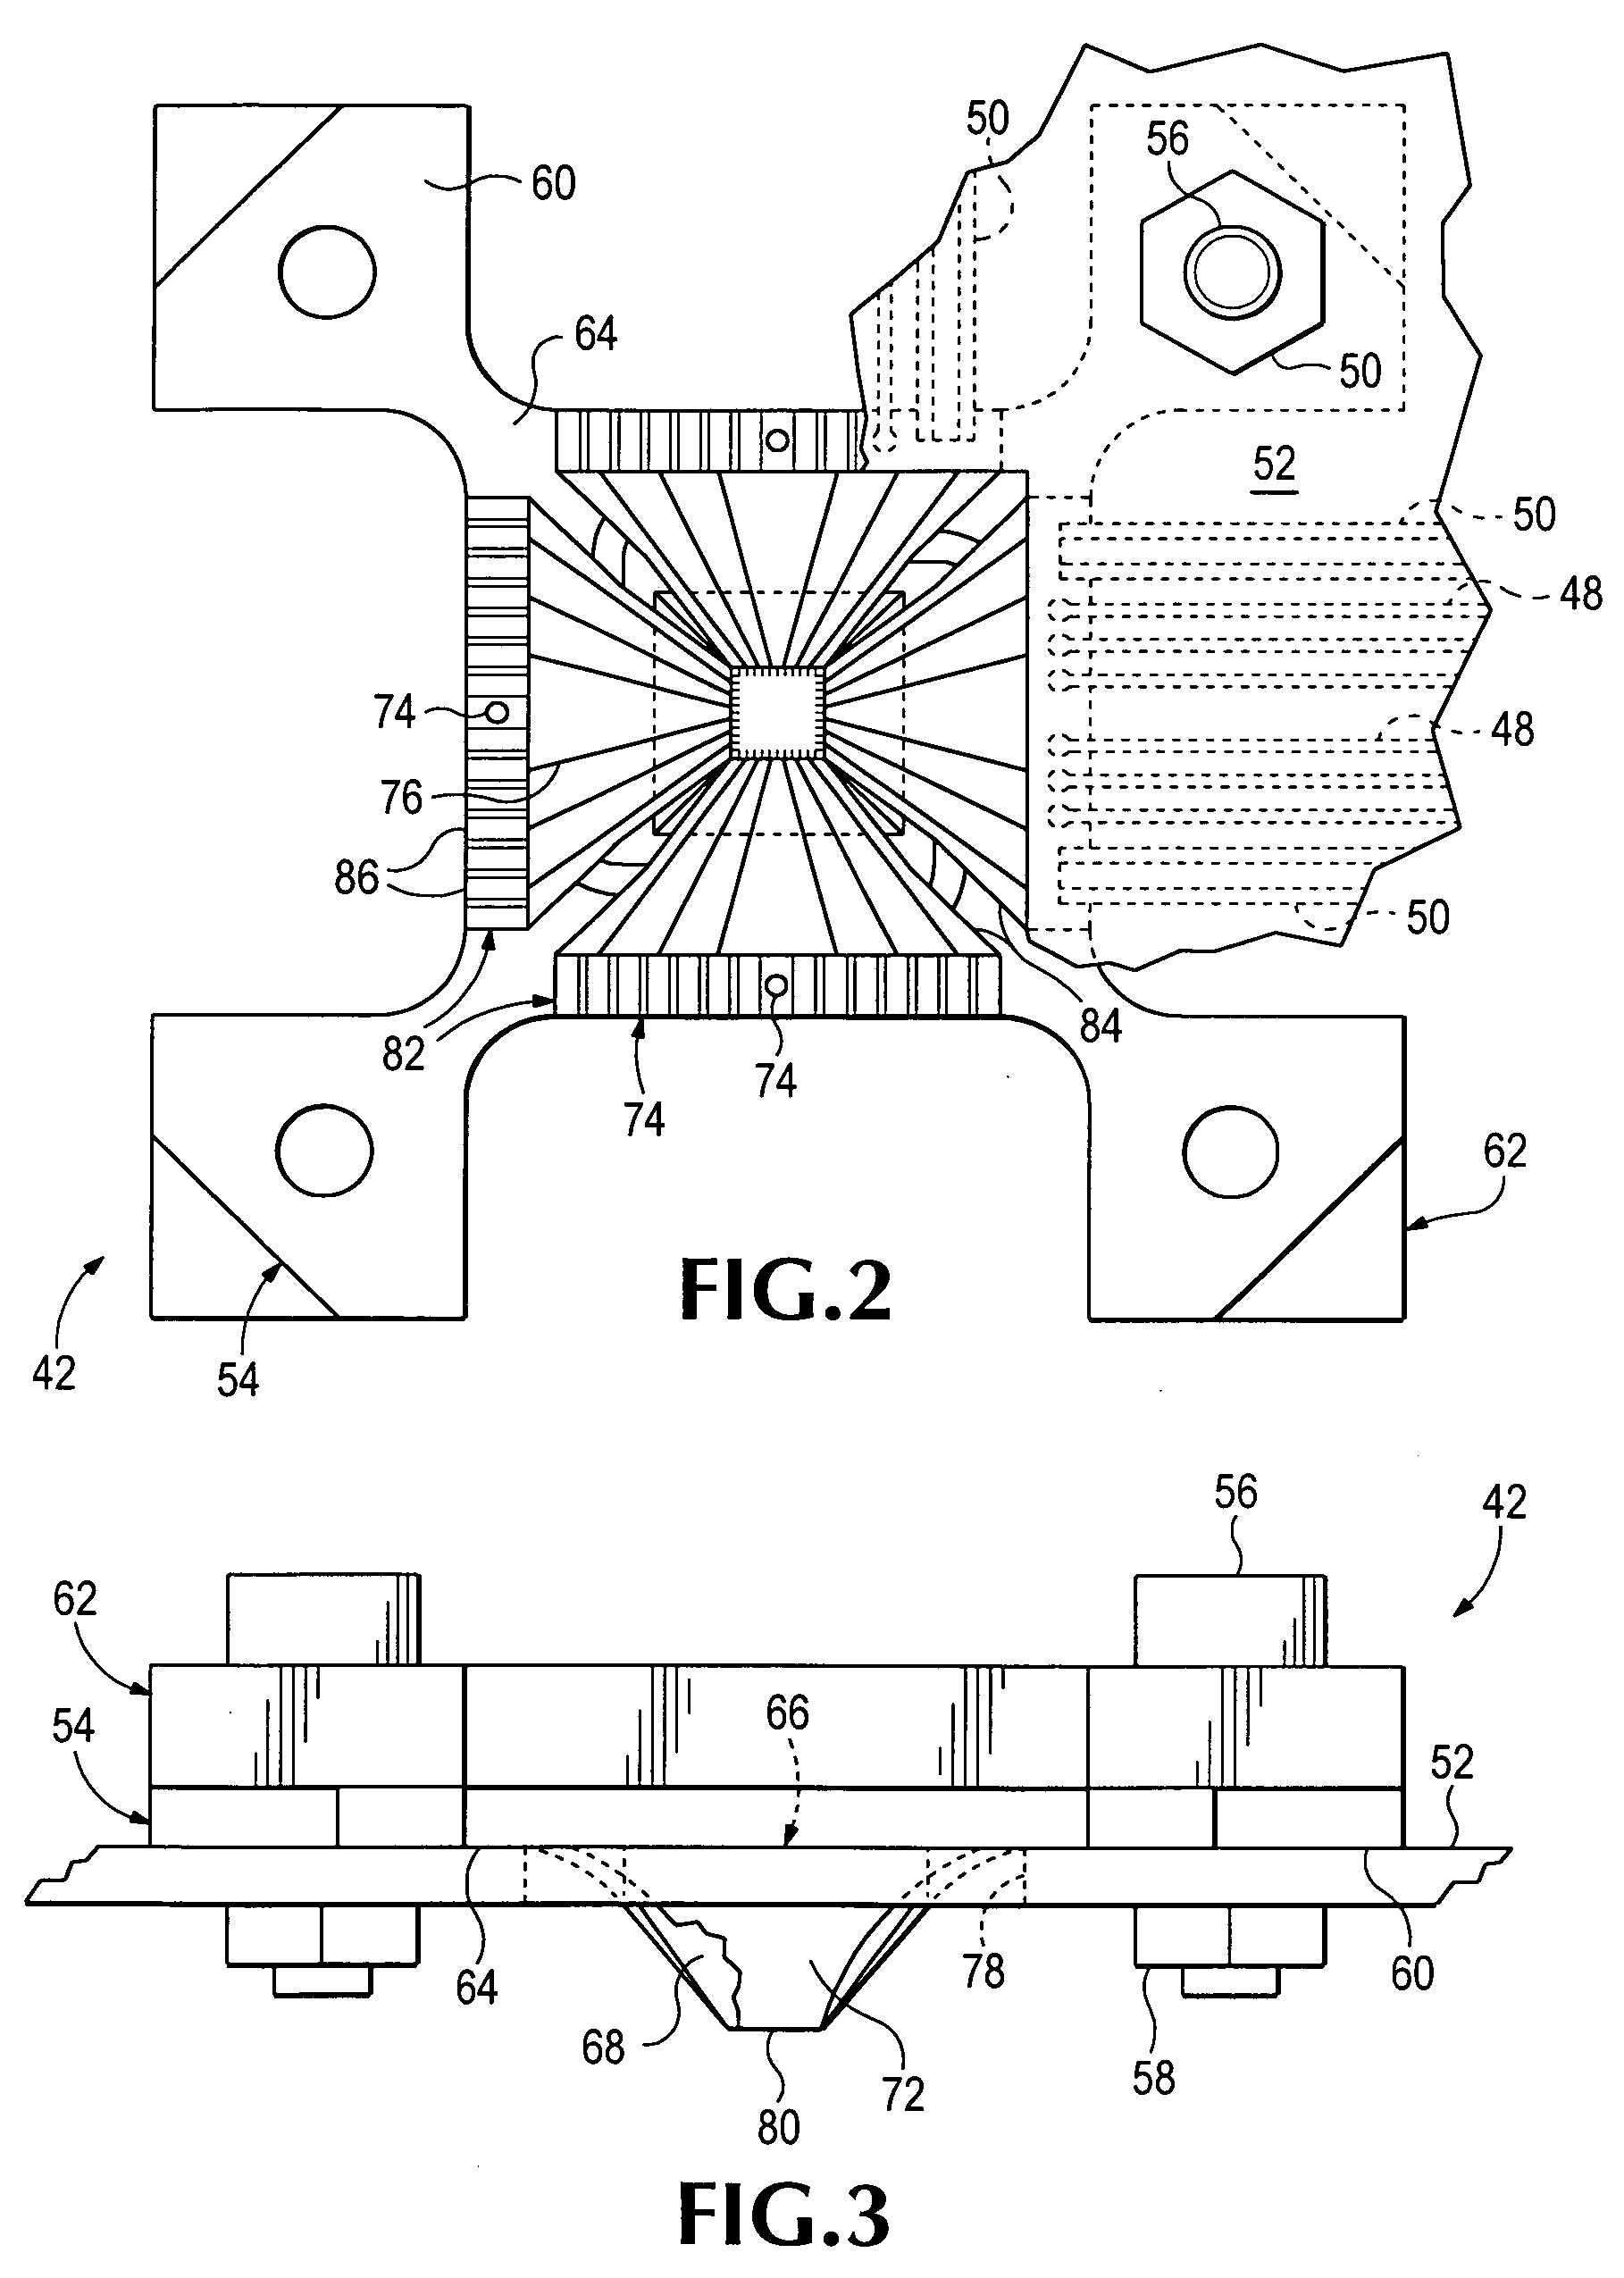 Impedance optimized interface for membrane probe application